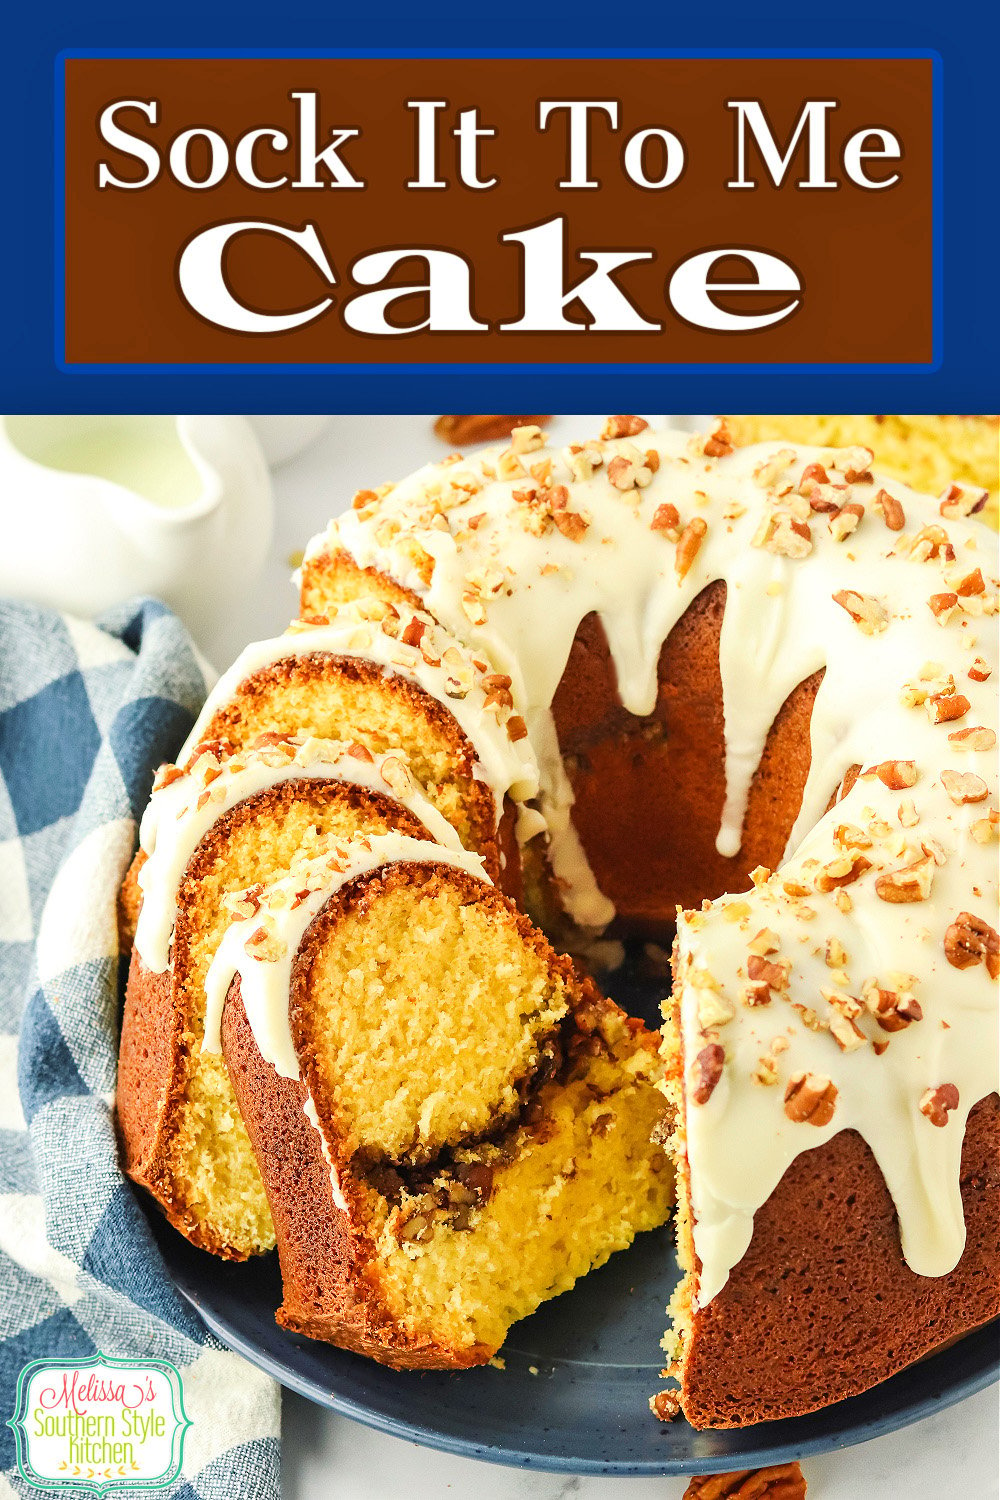 This Sock It To Me Cake is a scratch made dessert that will make a beautiful edible centerpiece for your breakfast, brunch or dessert table.#sockittomecake #coffeecake #cakes #cakerecipe #cinnamoncake #easycakerecipe via @melissasssk